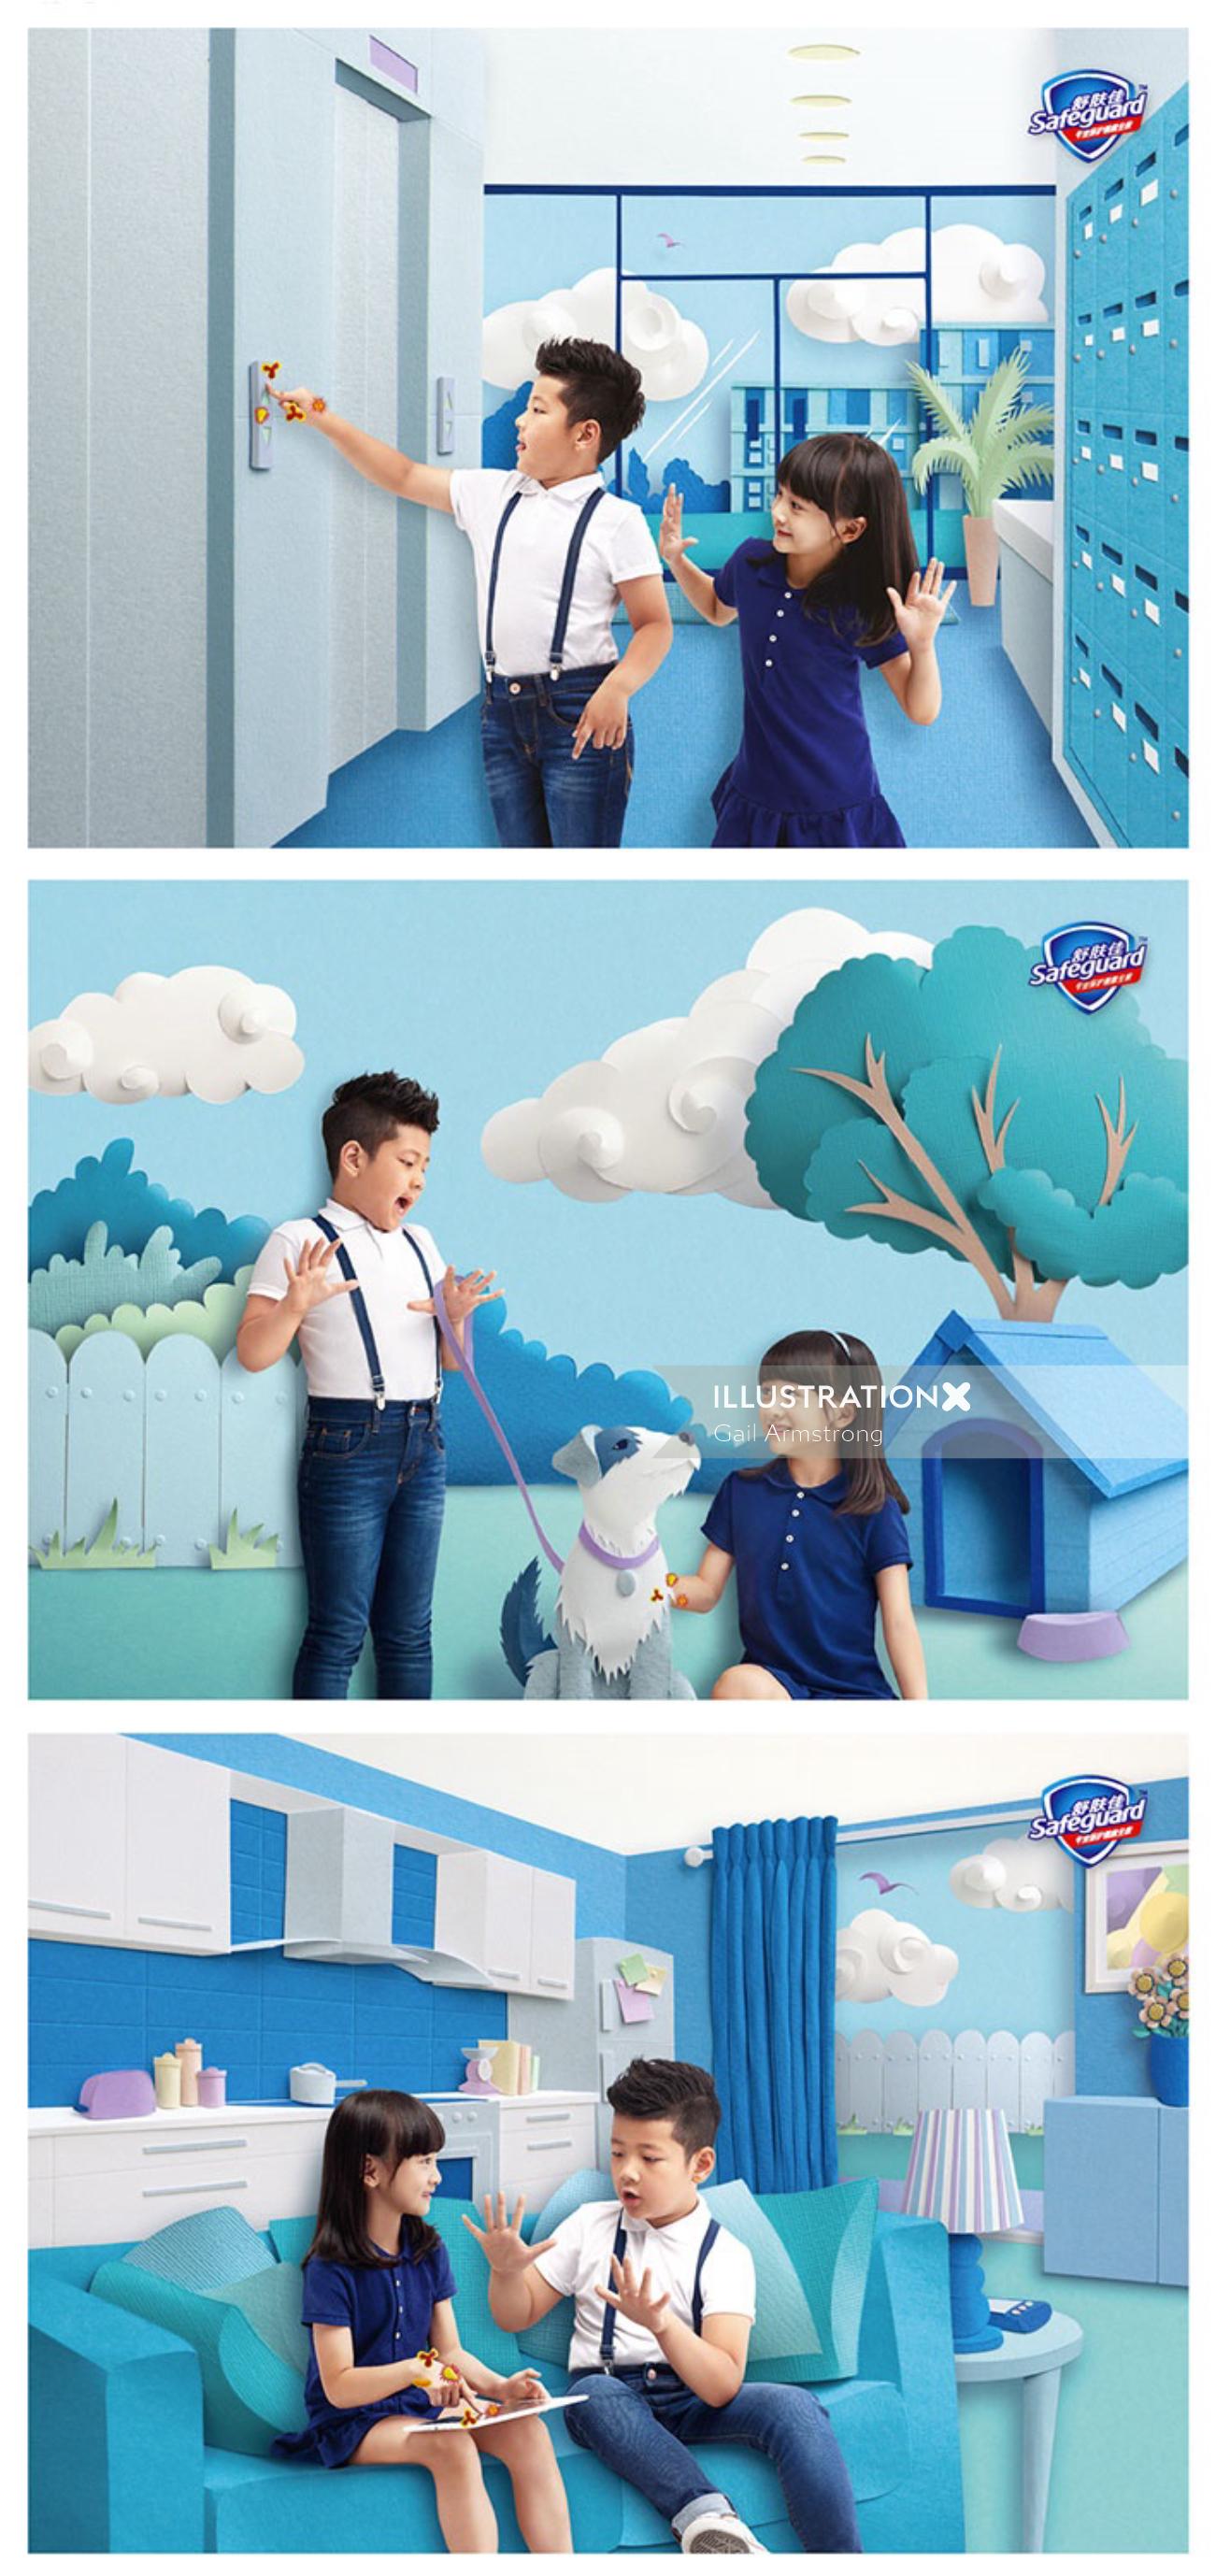 Papercut locations and scenes for Handwash campaign